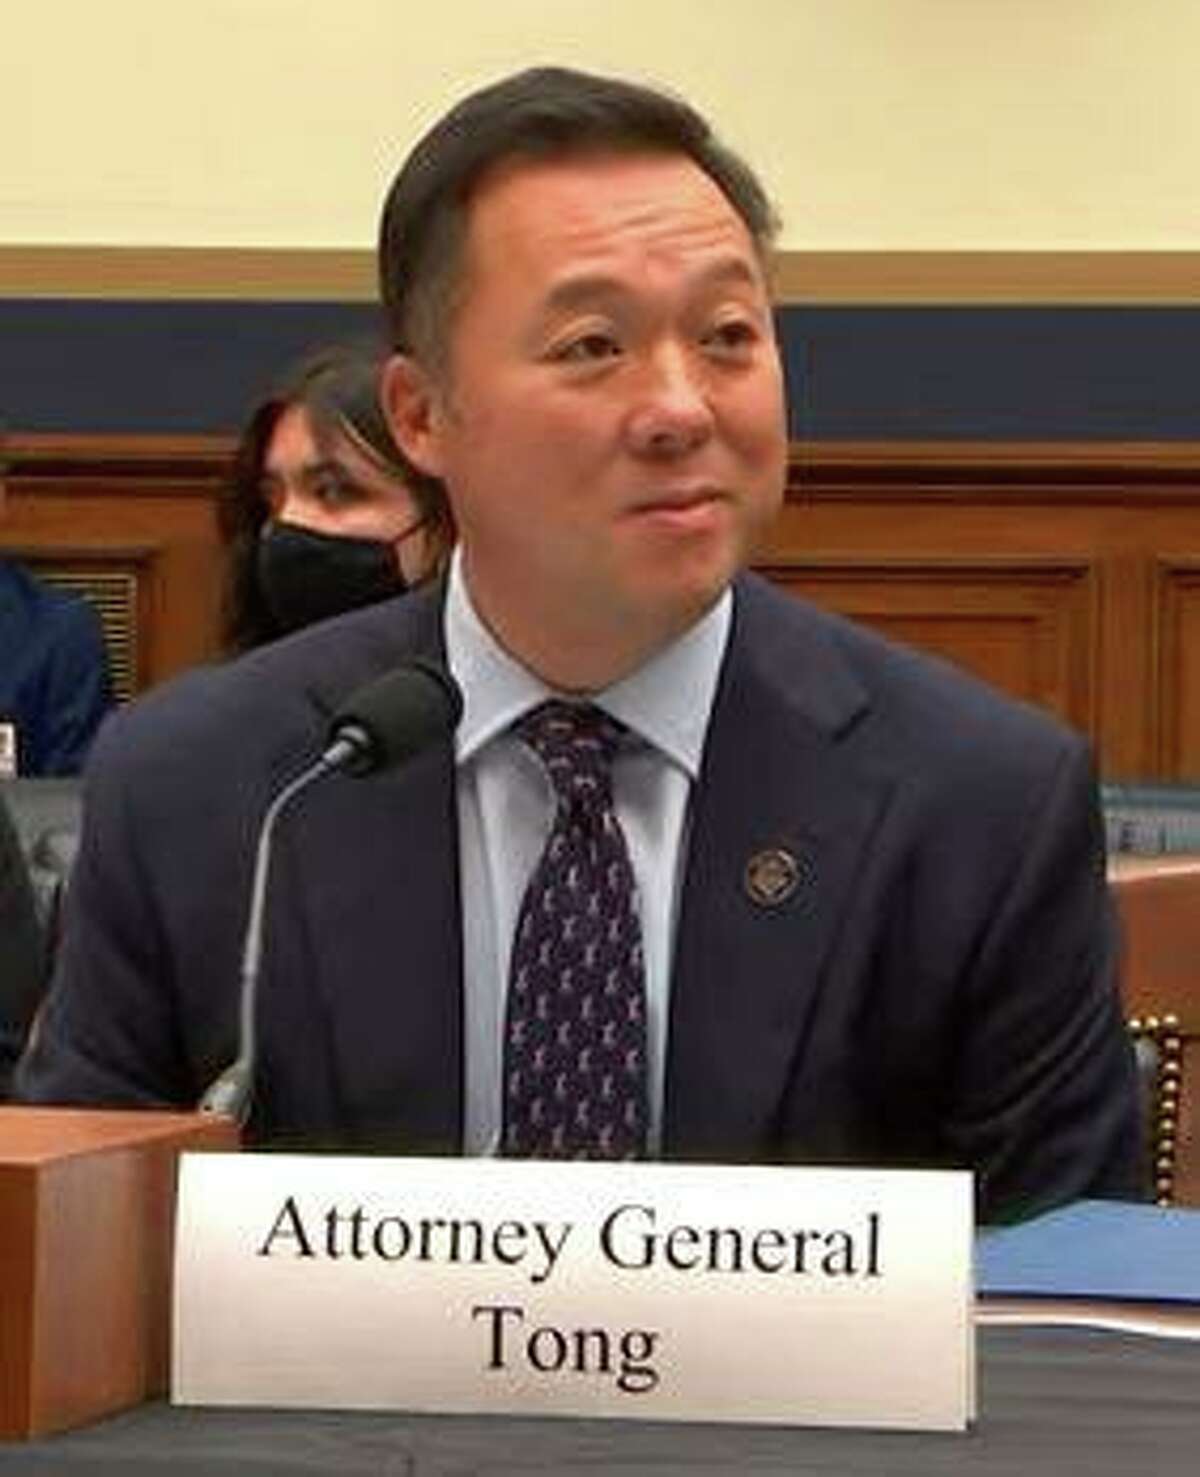 Connecticut Attorney General William Tong testifies during a hearing held by the House Judiciary Committee on Wednesday, July 28, 2021, in Washington, D.C.